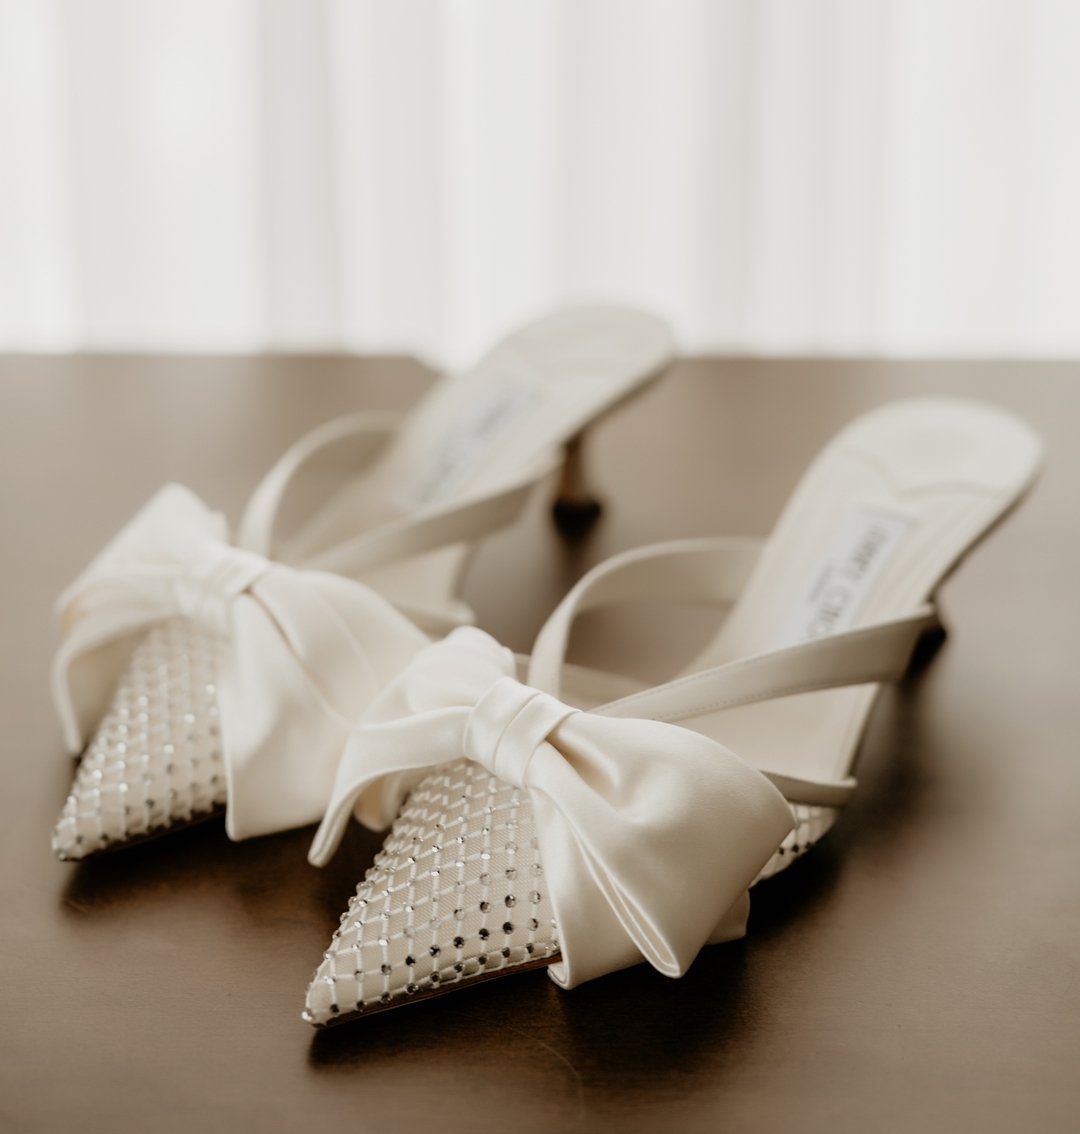 I love that heels in lower heights are in. If you're going to have pretty shoes, especially ones you've invested in, you may as well be able to wear them all day, right? These @JimmyChoo heels with the oversized bows are just divine.

Photography @je